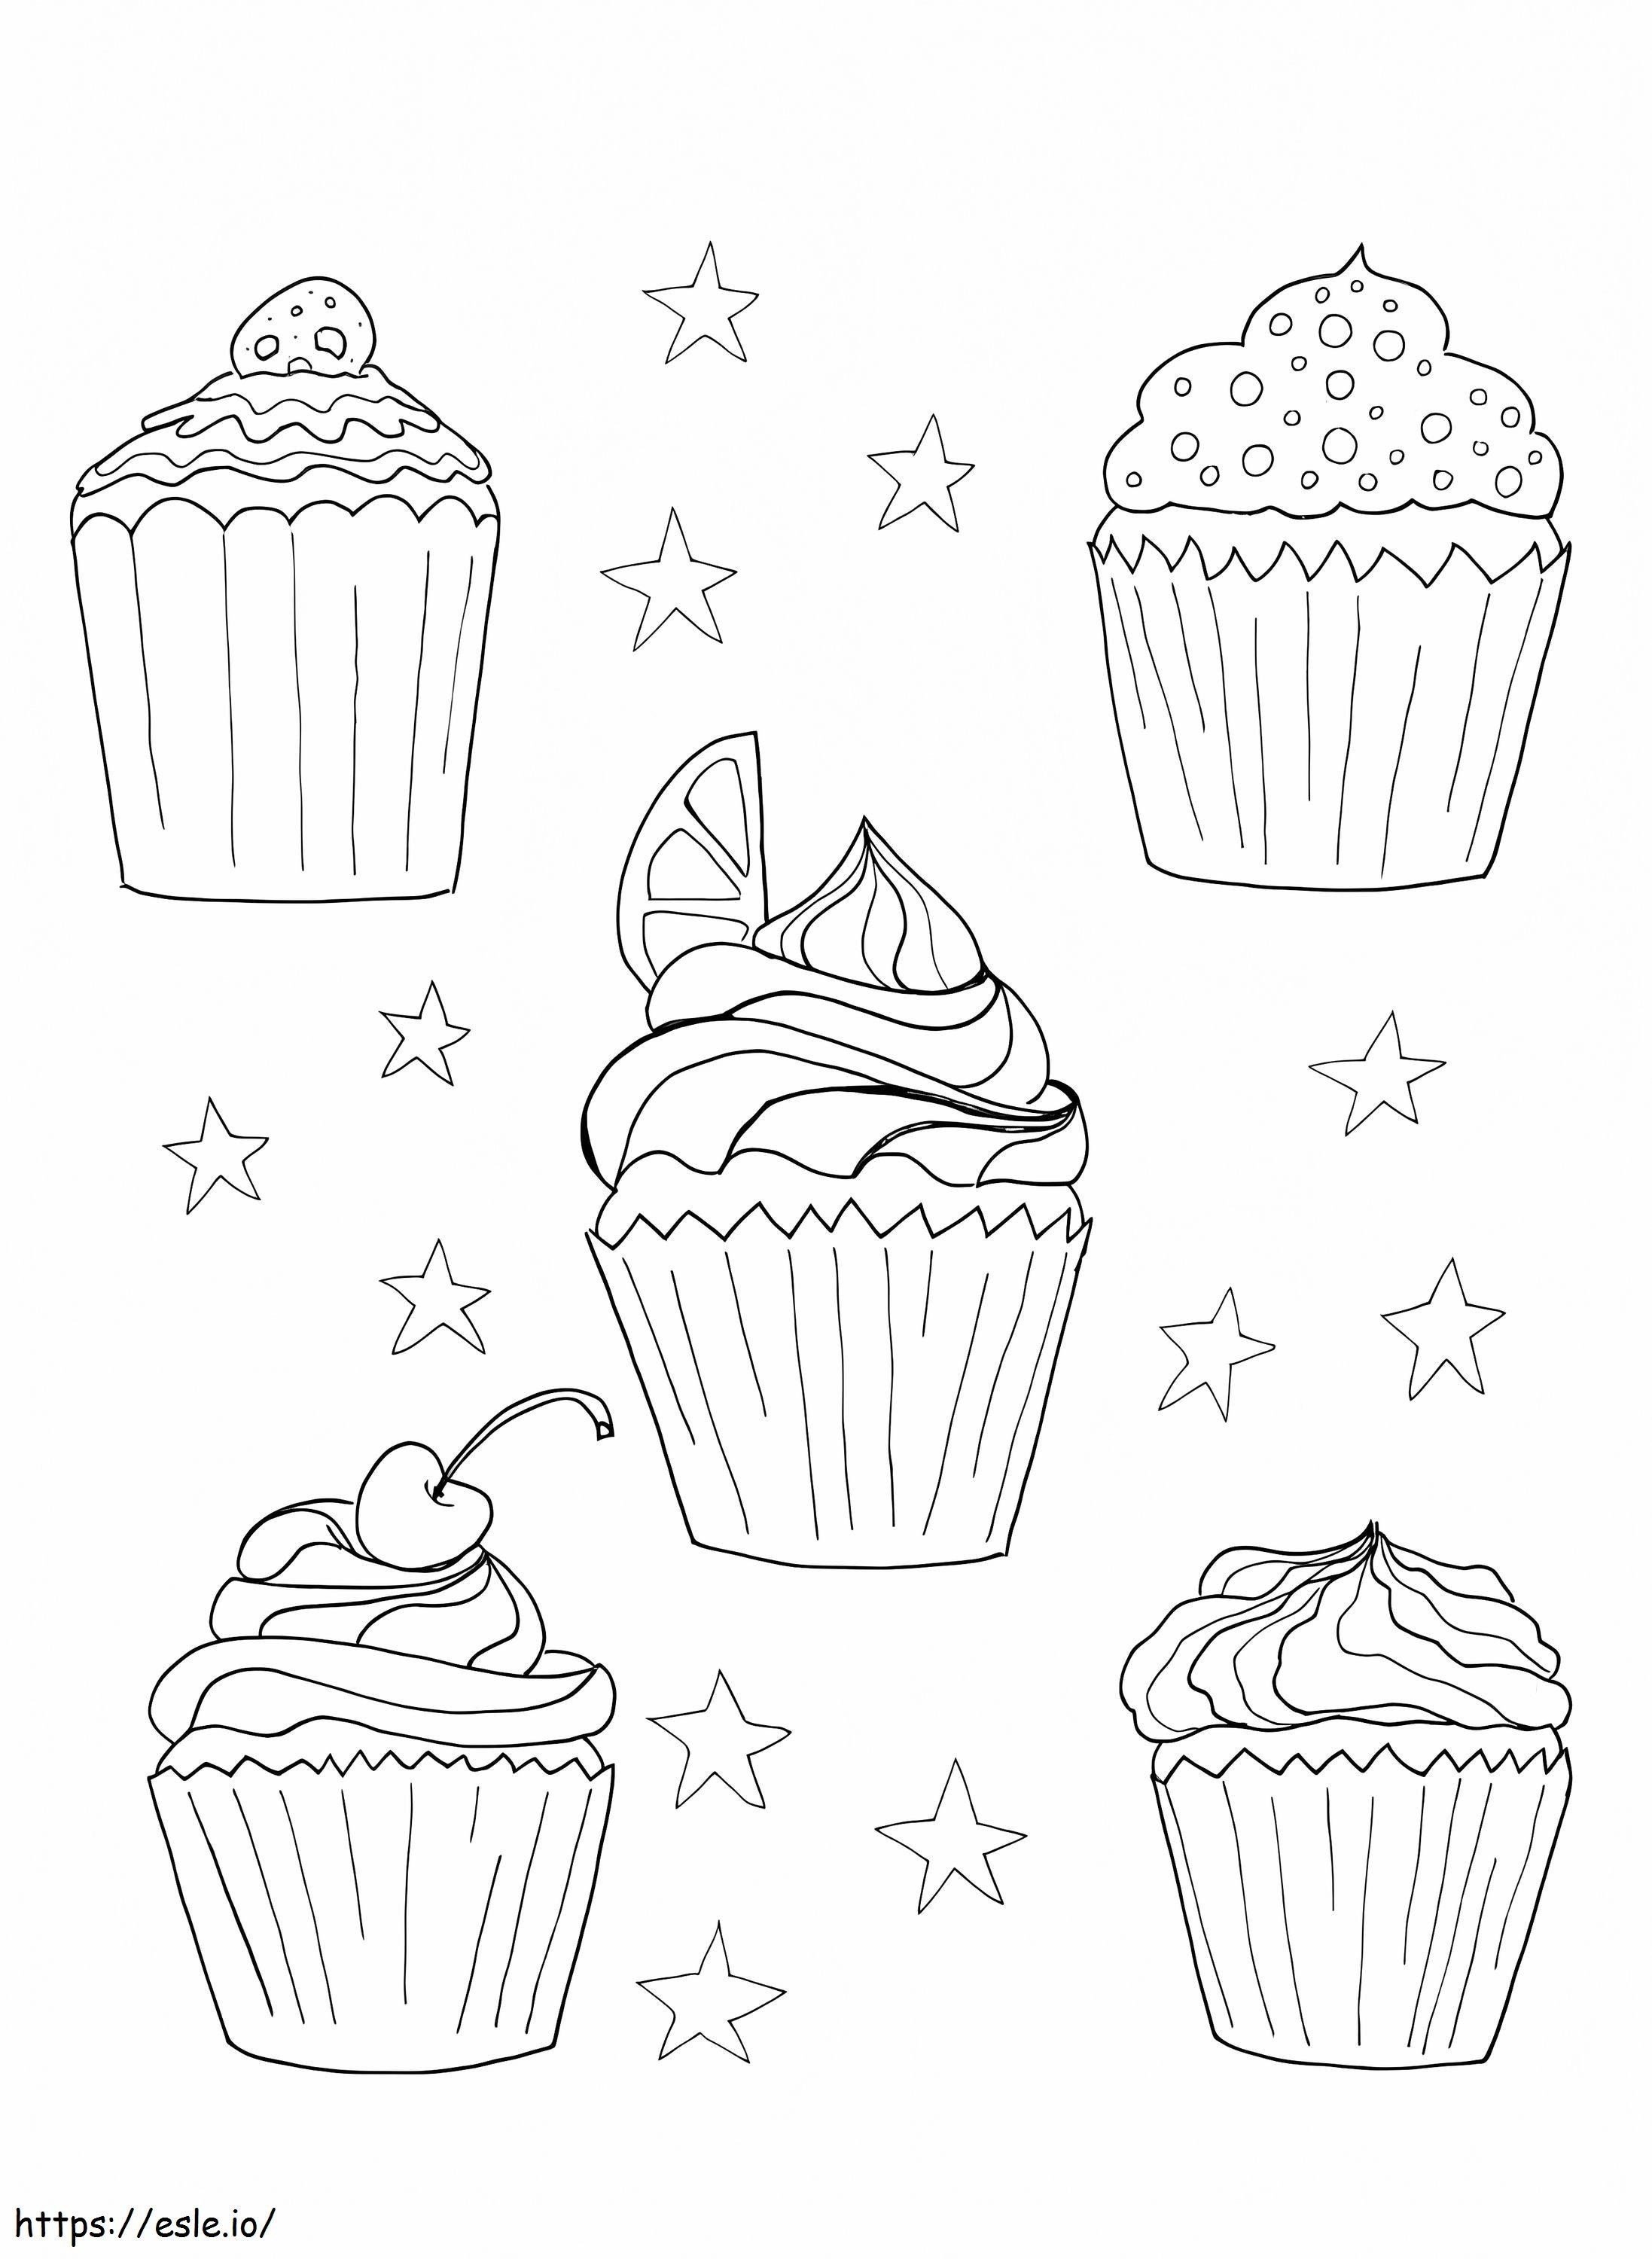 Cupcake Five coloring page